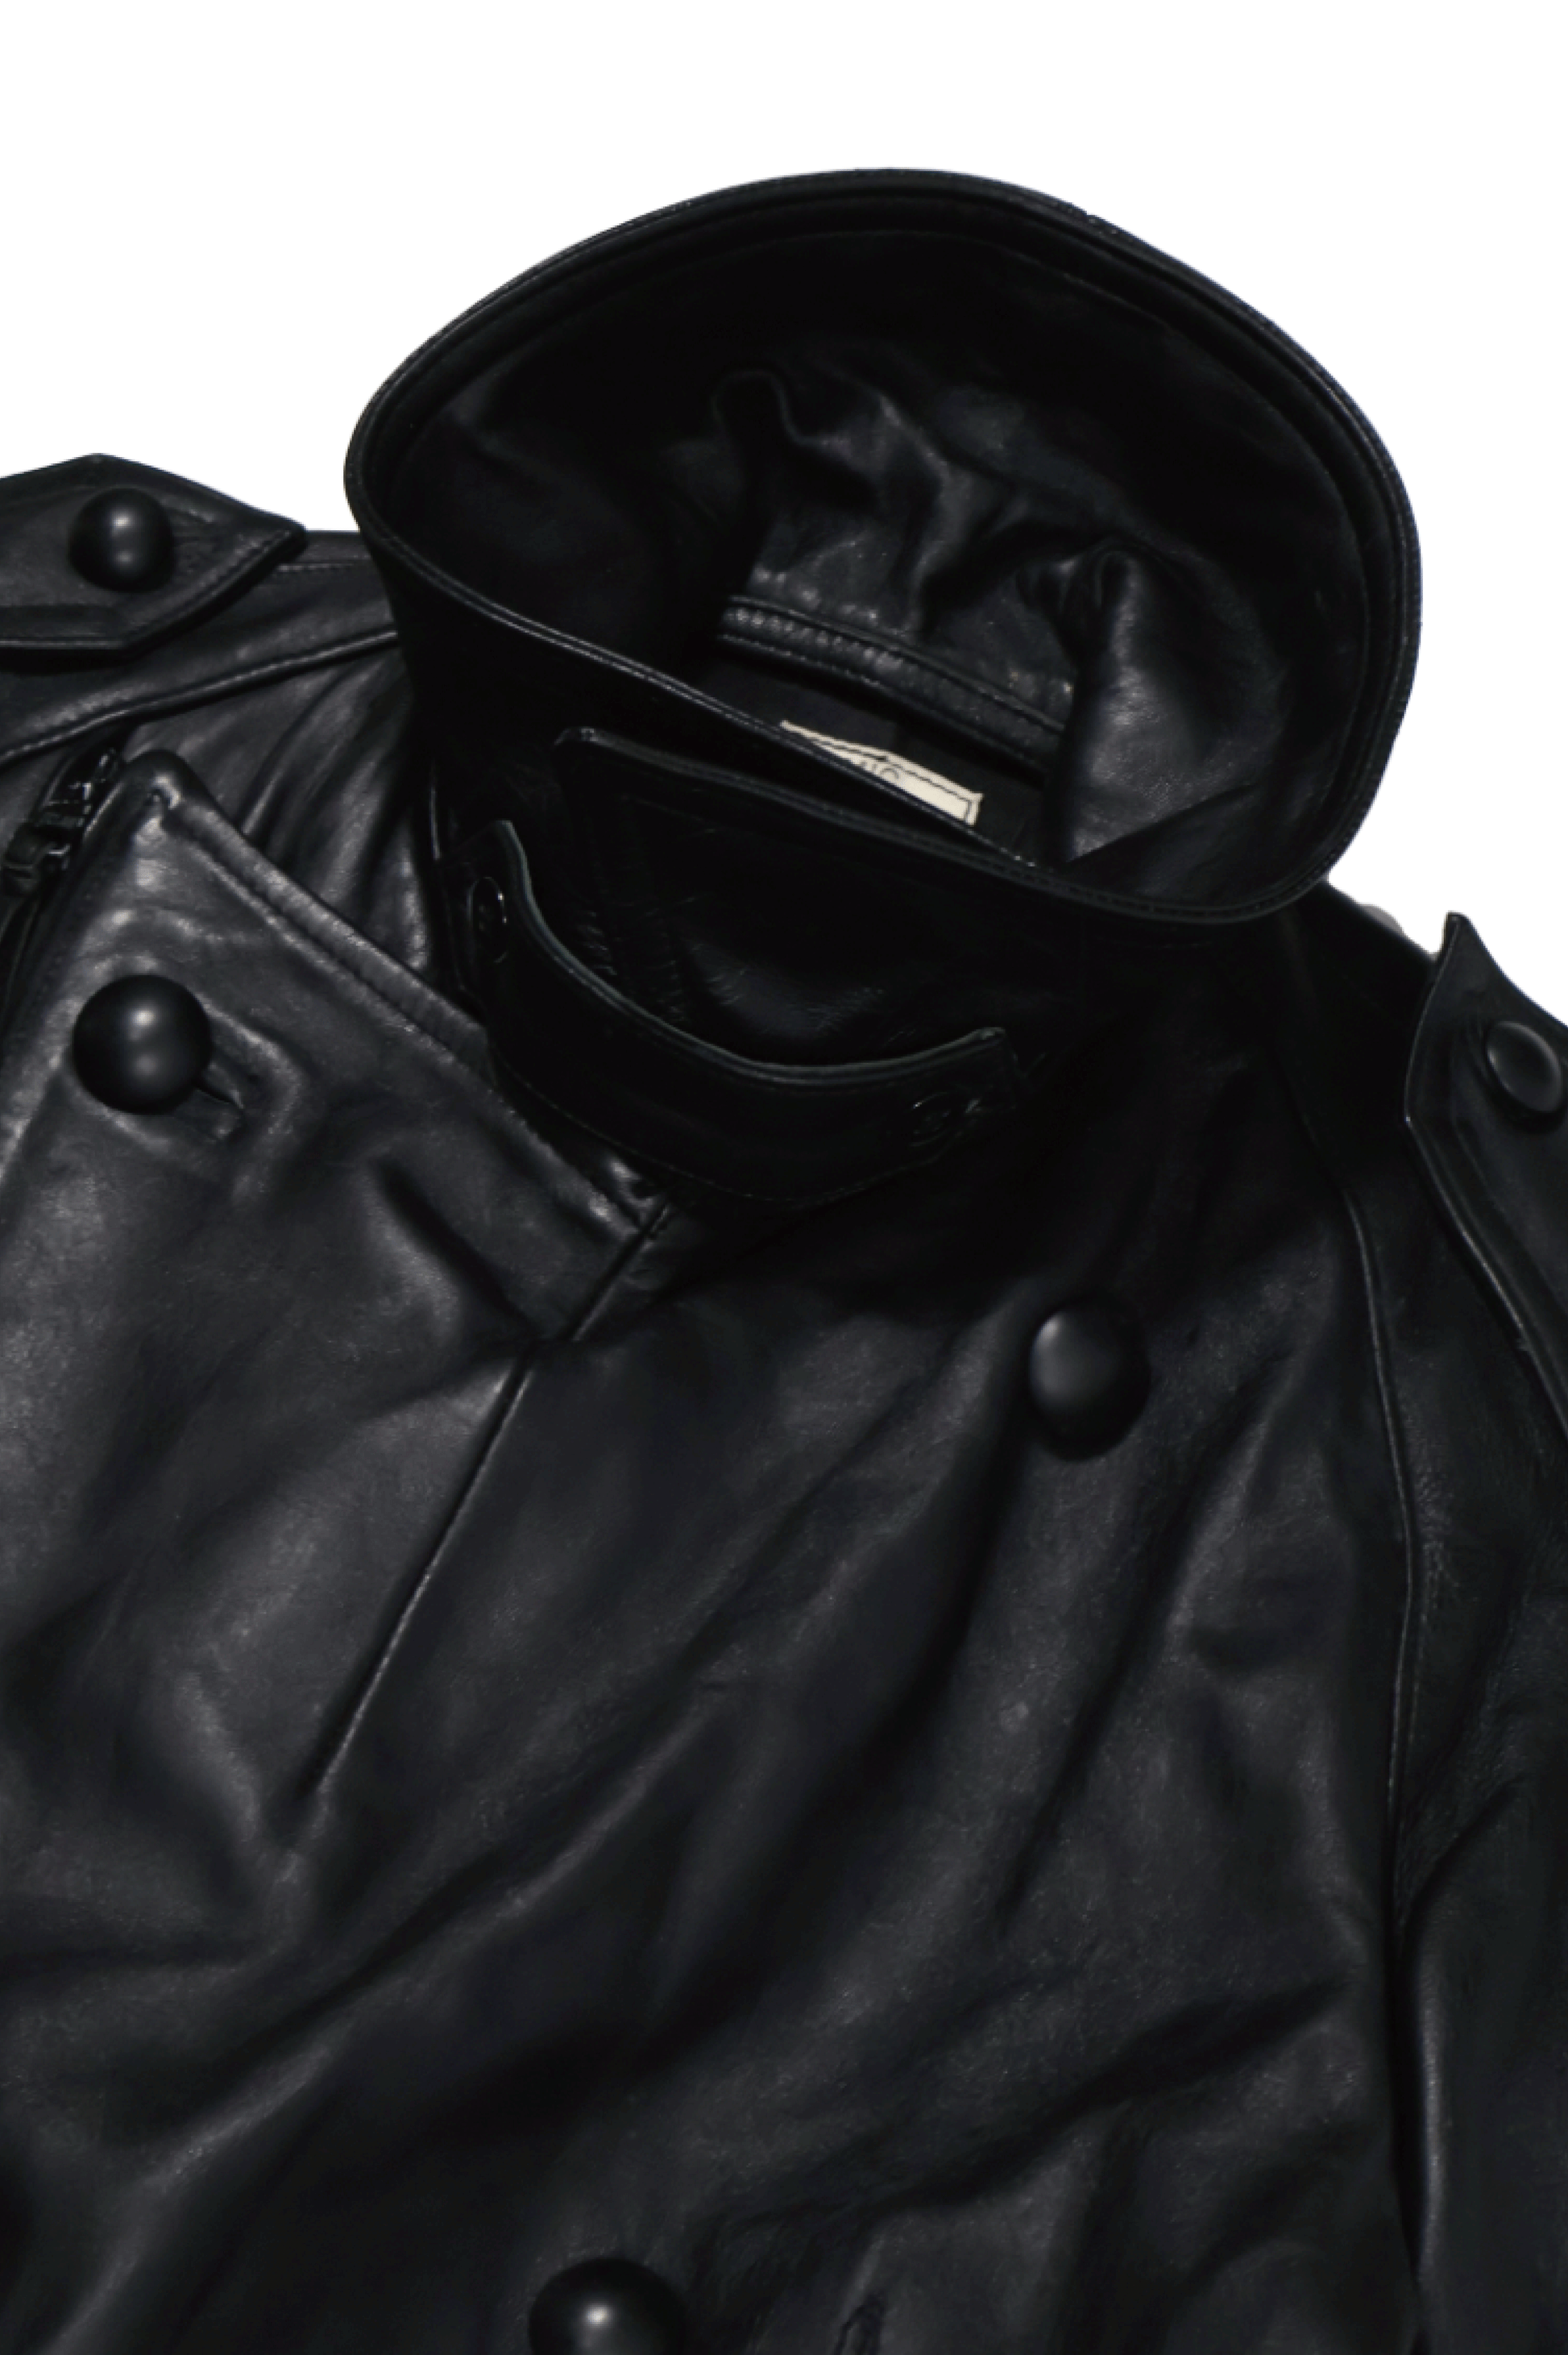 80s French Army Motorcycle Leather Coat多少の誤差はご了承下さい